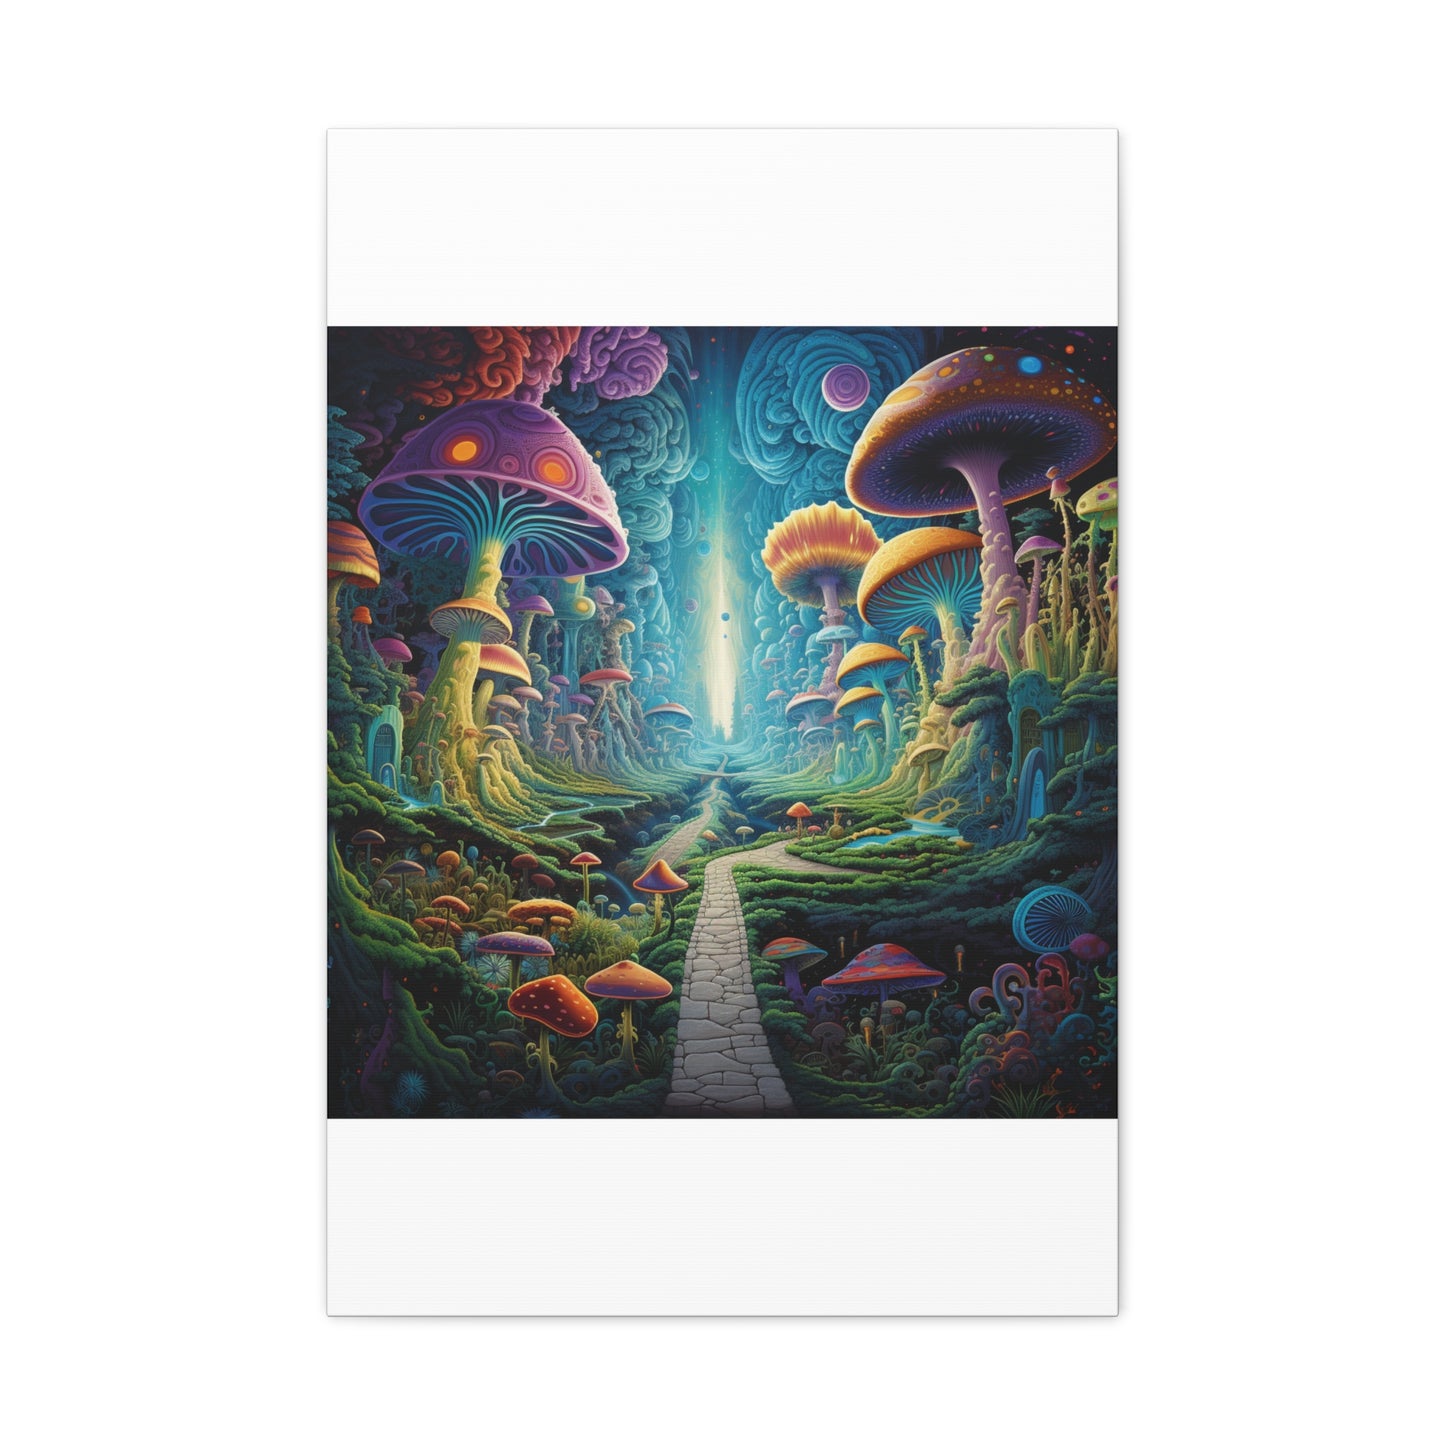 Trippy Canvas Gallery Wraps - Psychedelic Art for a Mind-Blowing Experience